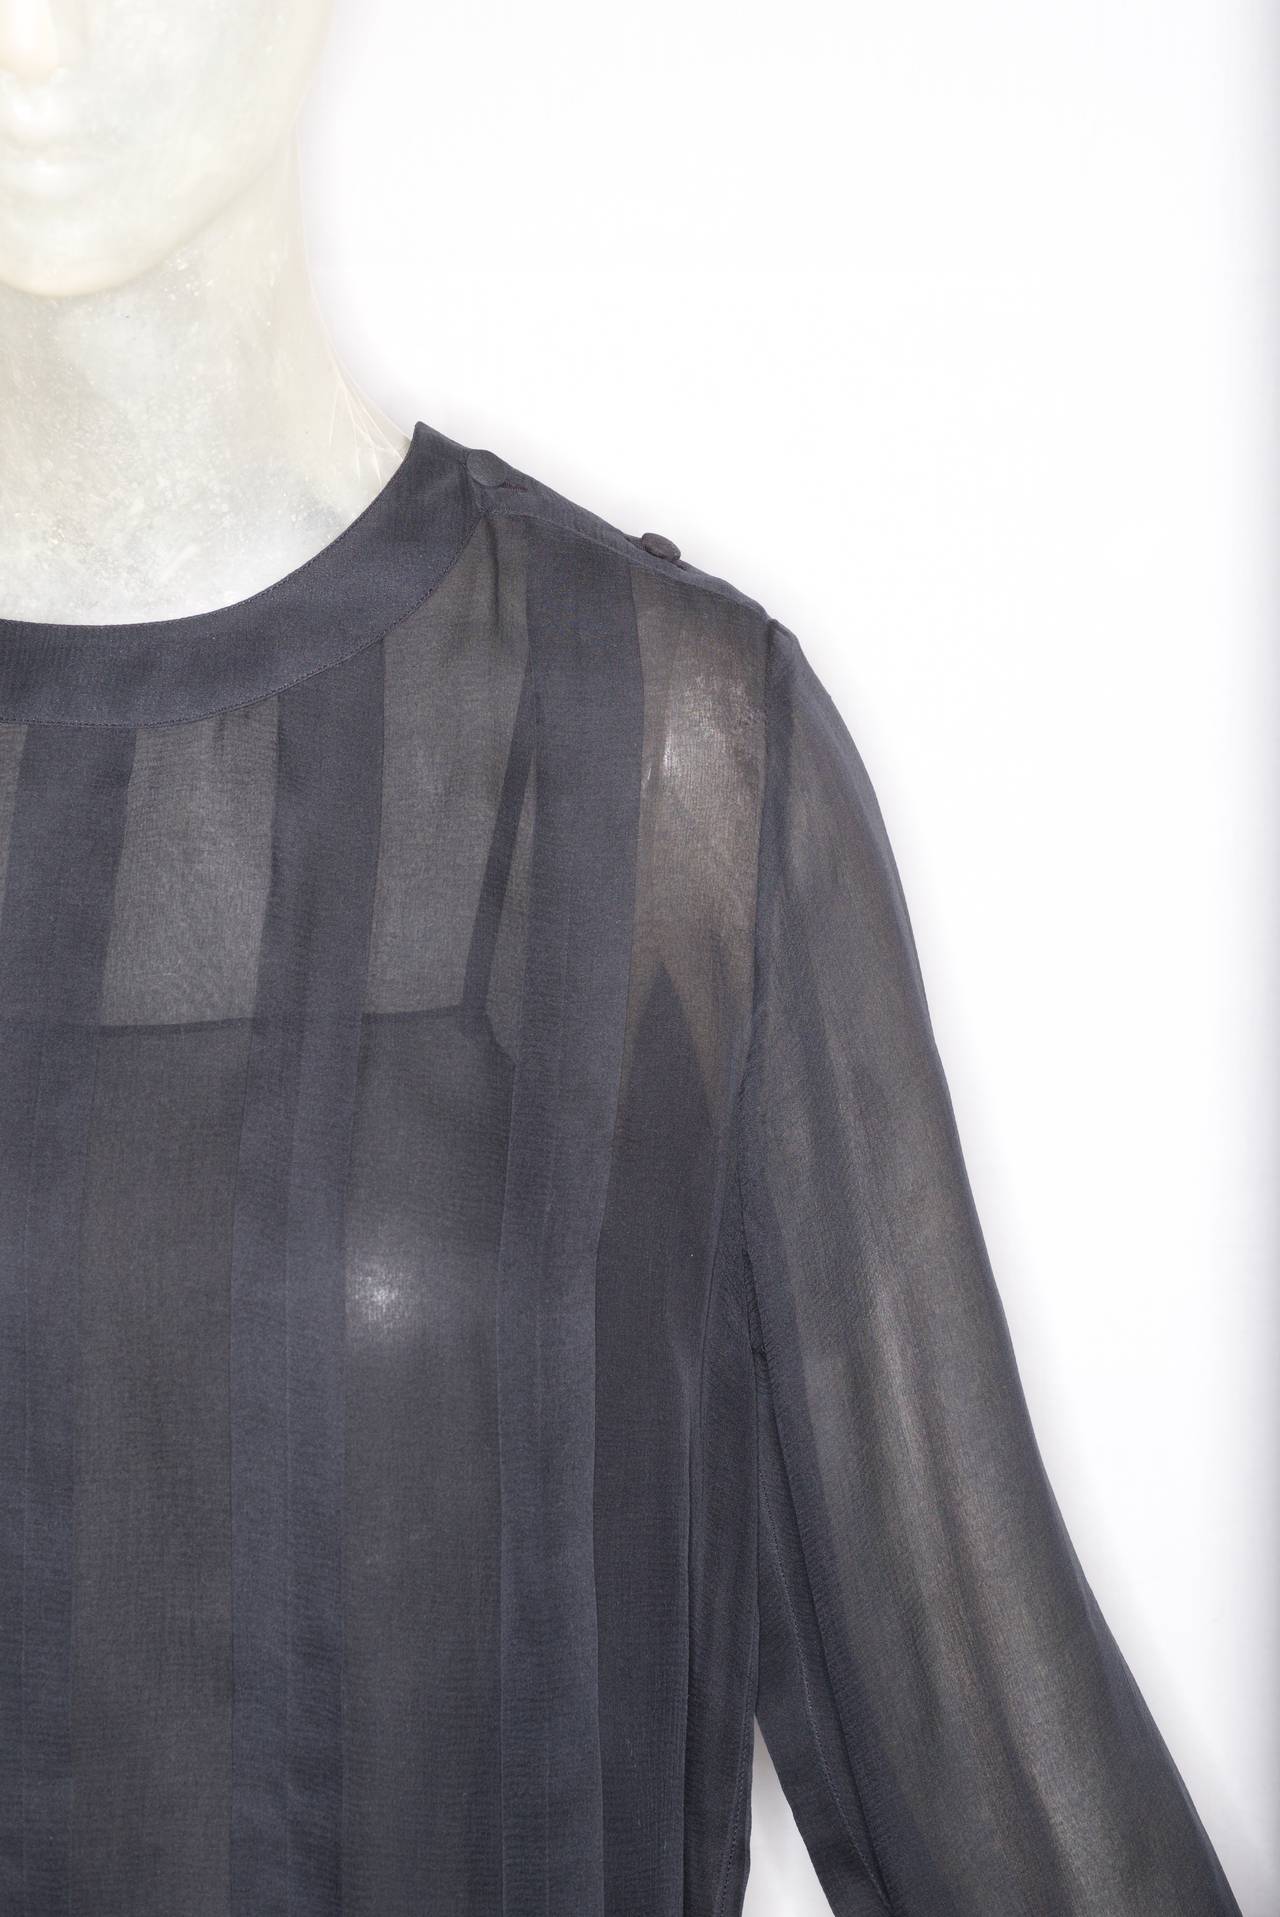 Chanel Silk Chiffon Blouse and Camisole In Excellent Condition For Sale In New York, NY